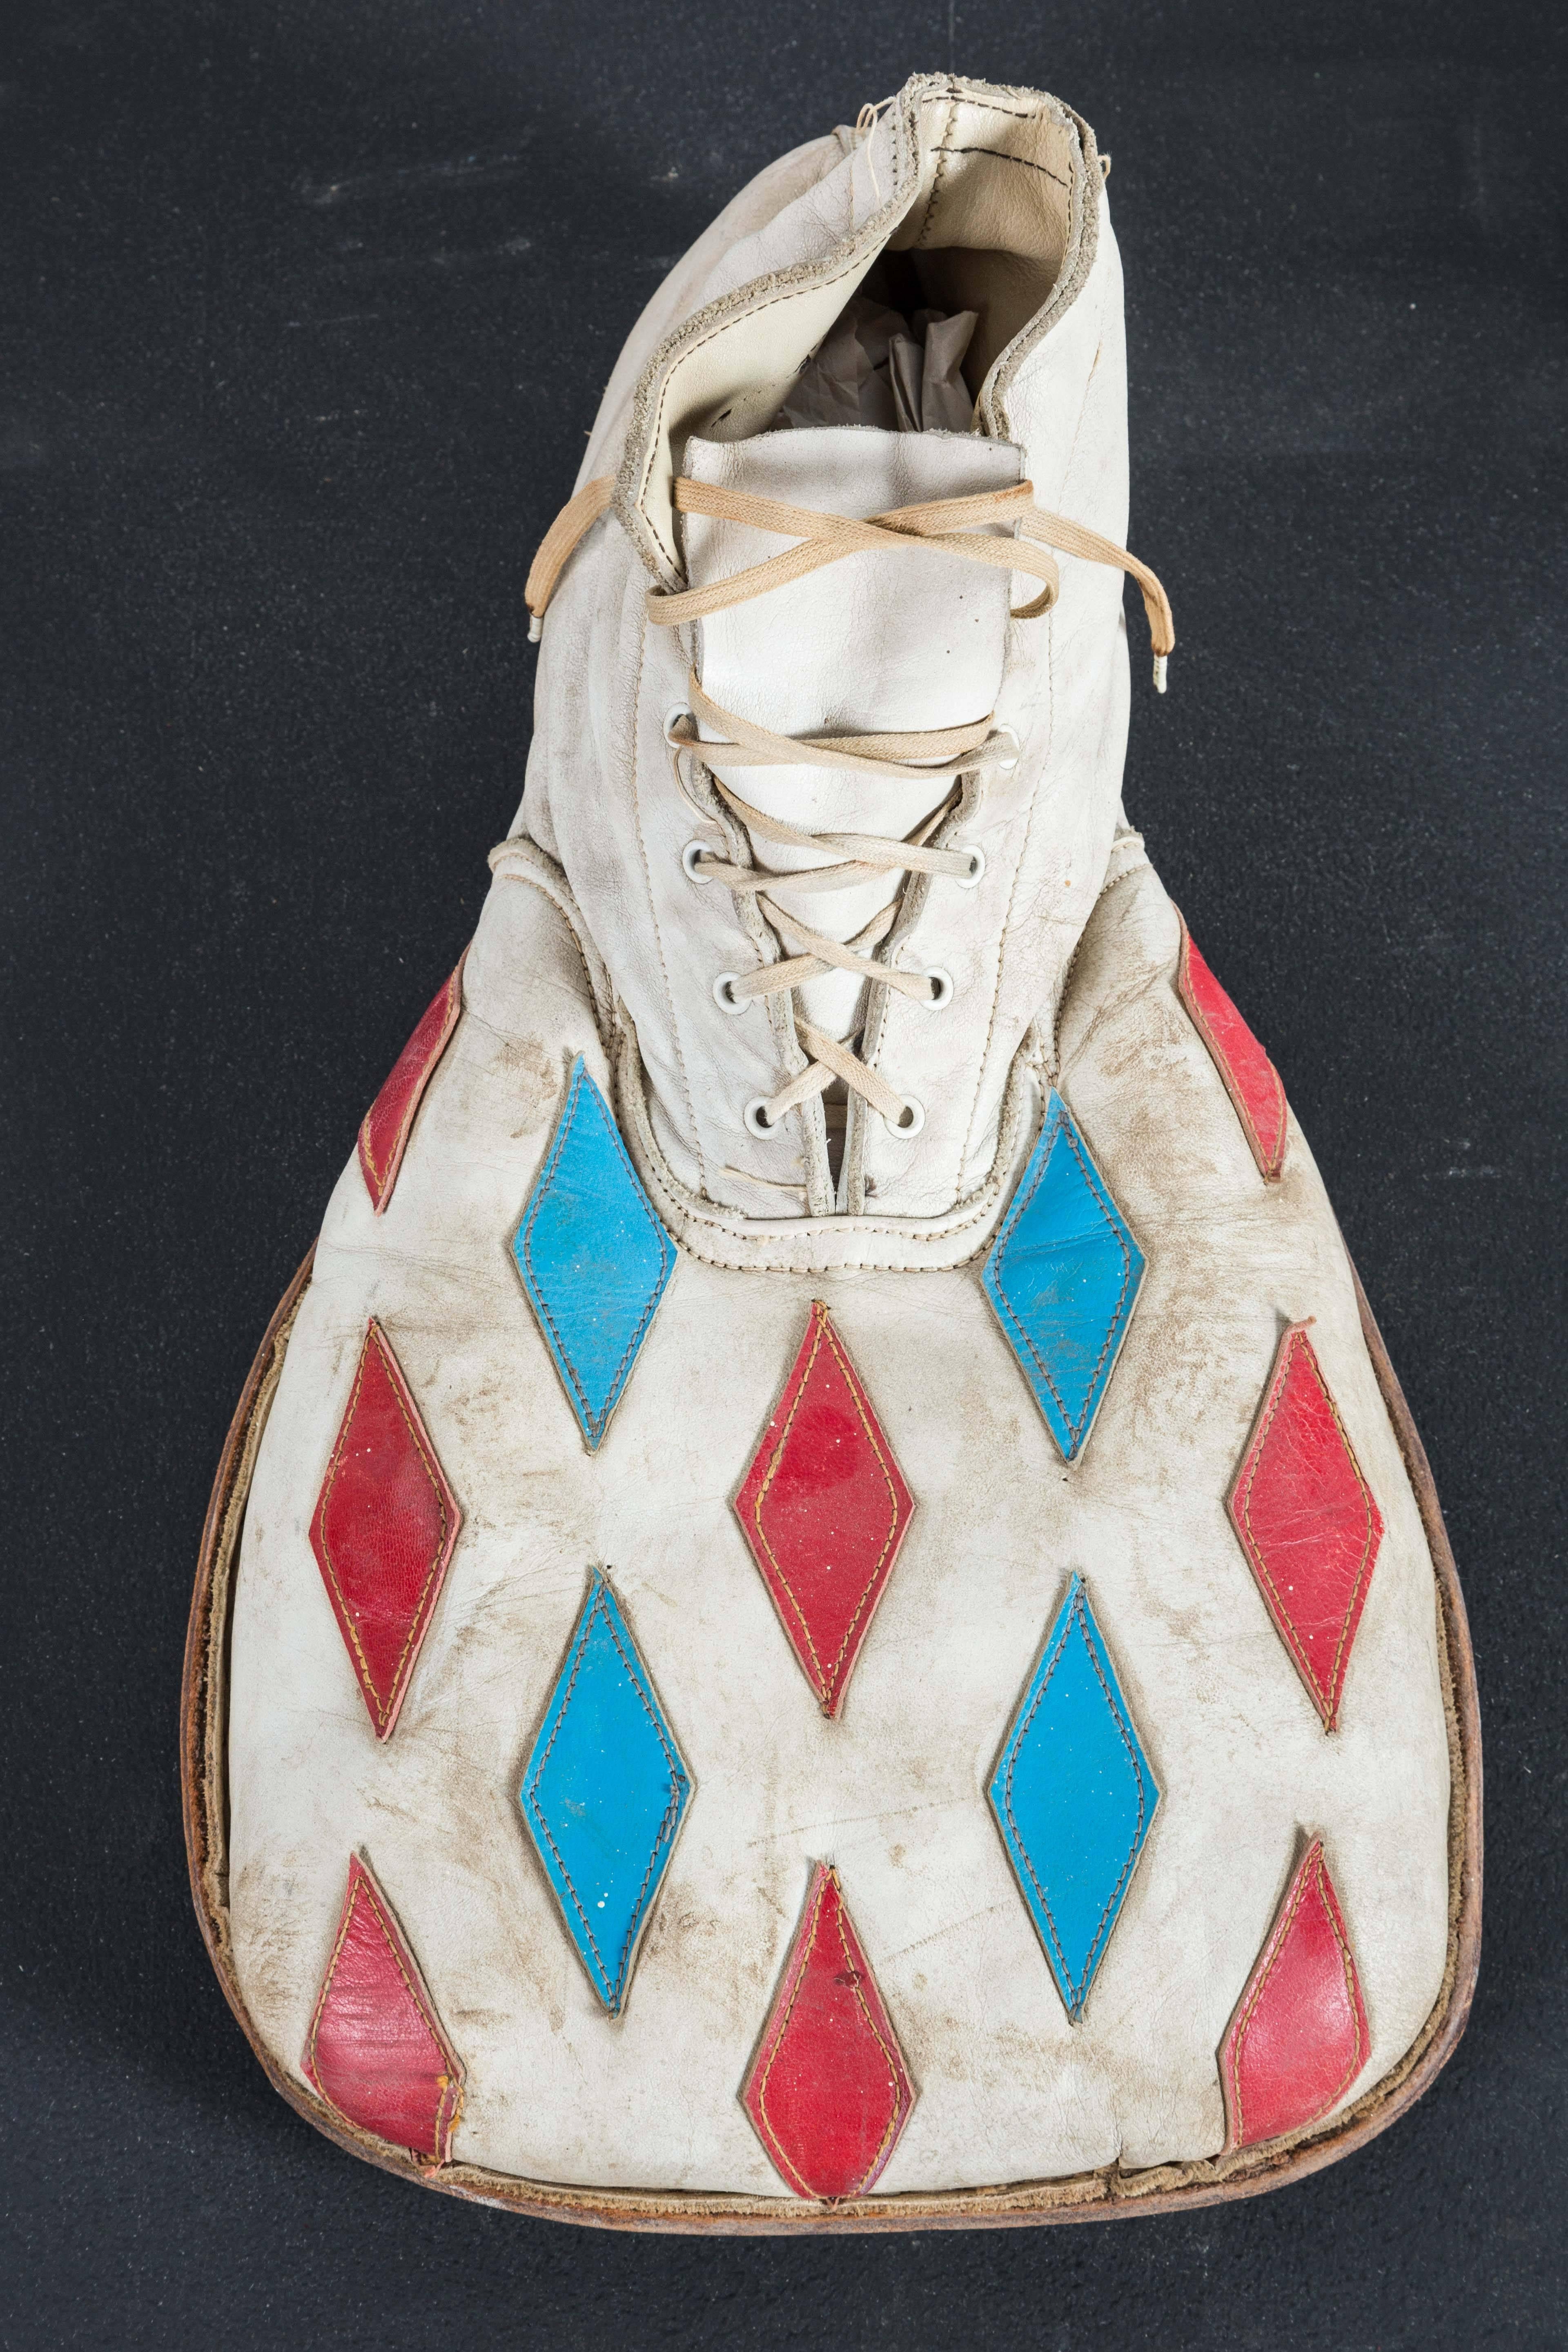 American Vintage Circus or Carnival Clown Diamond Red White and Blue Clown Shoes